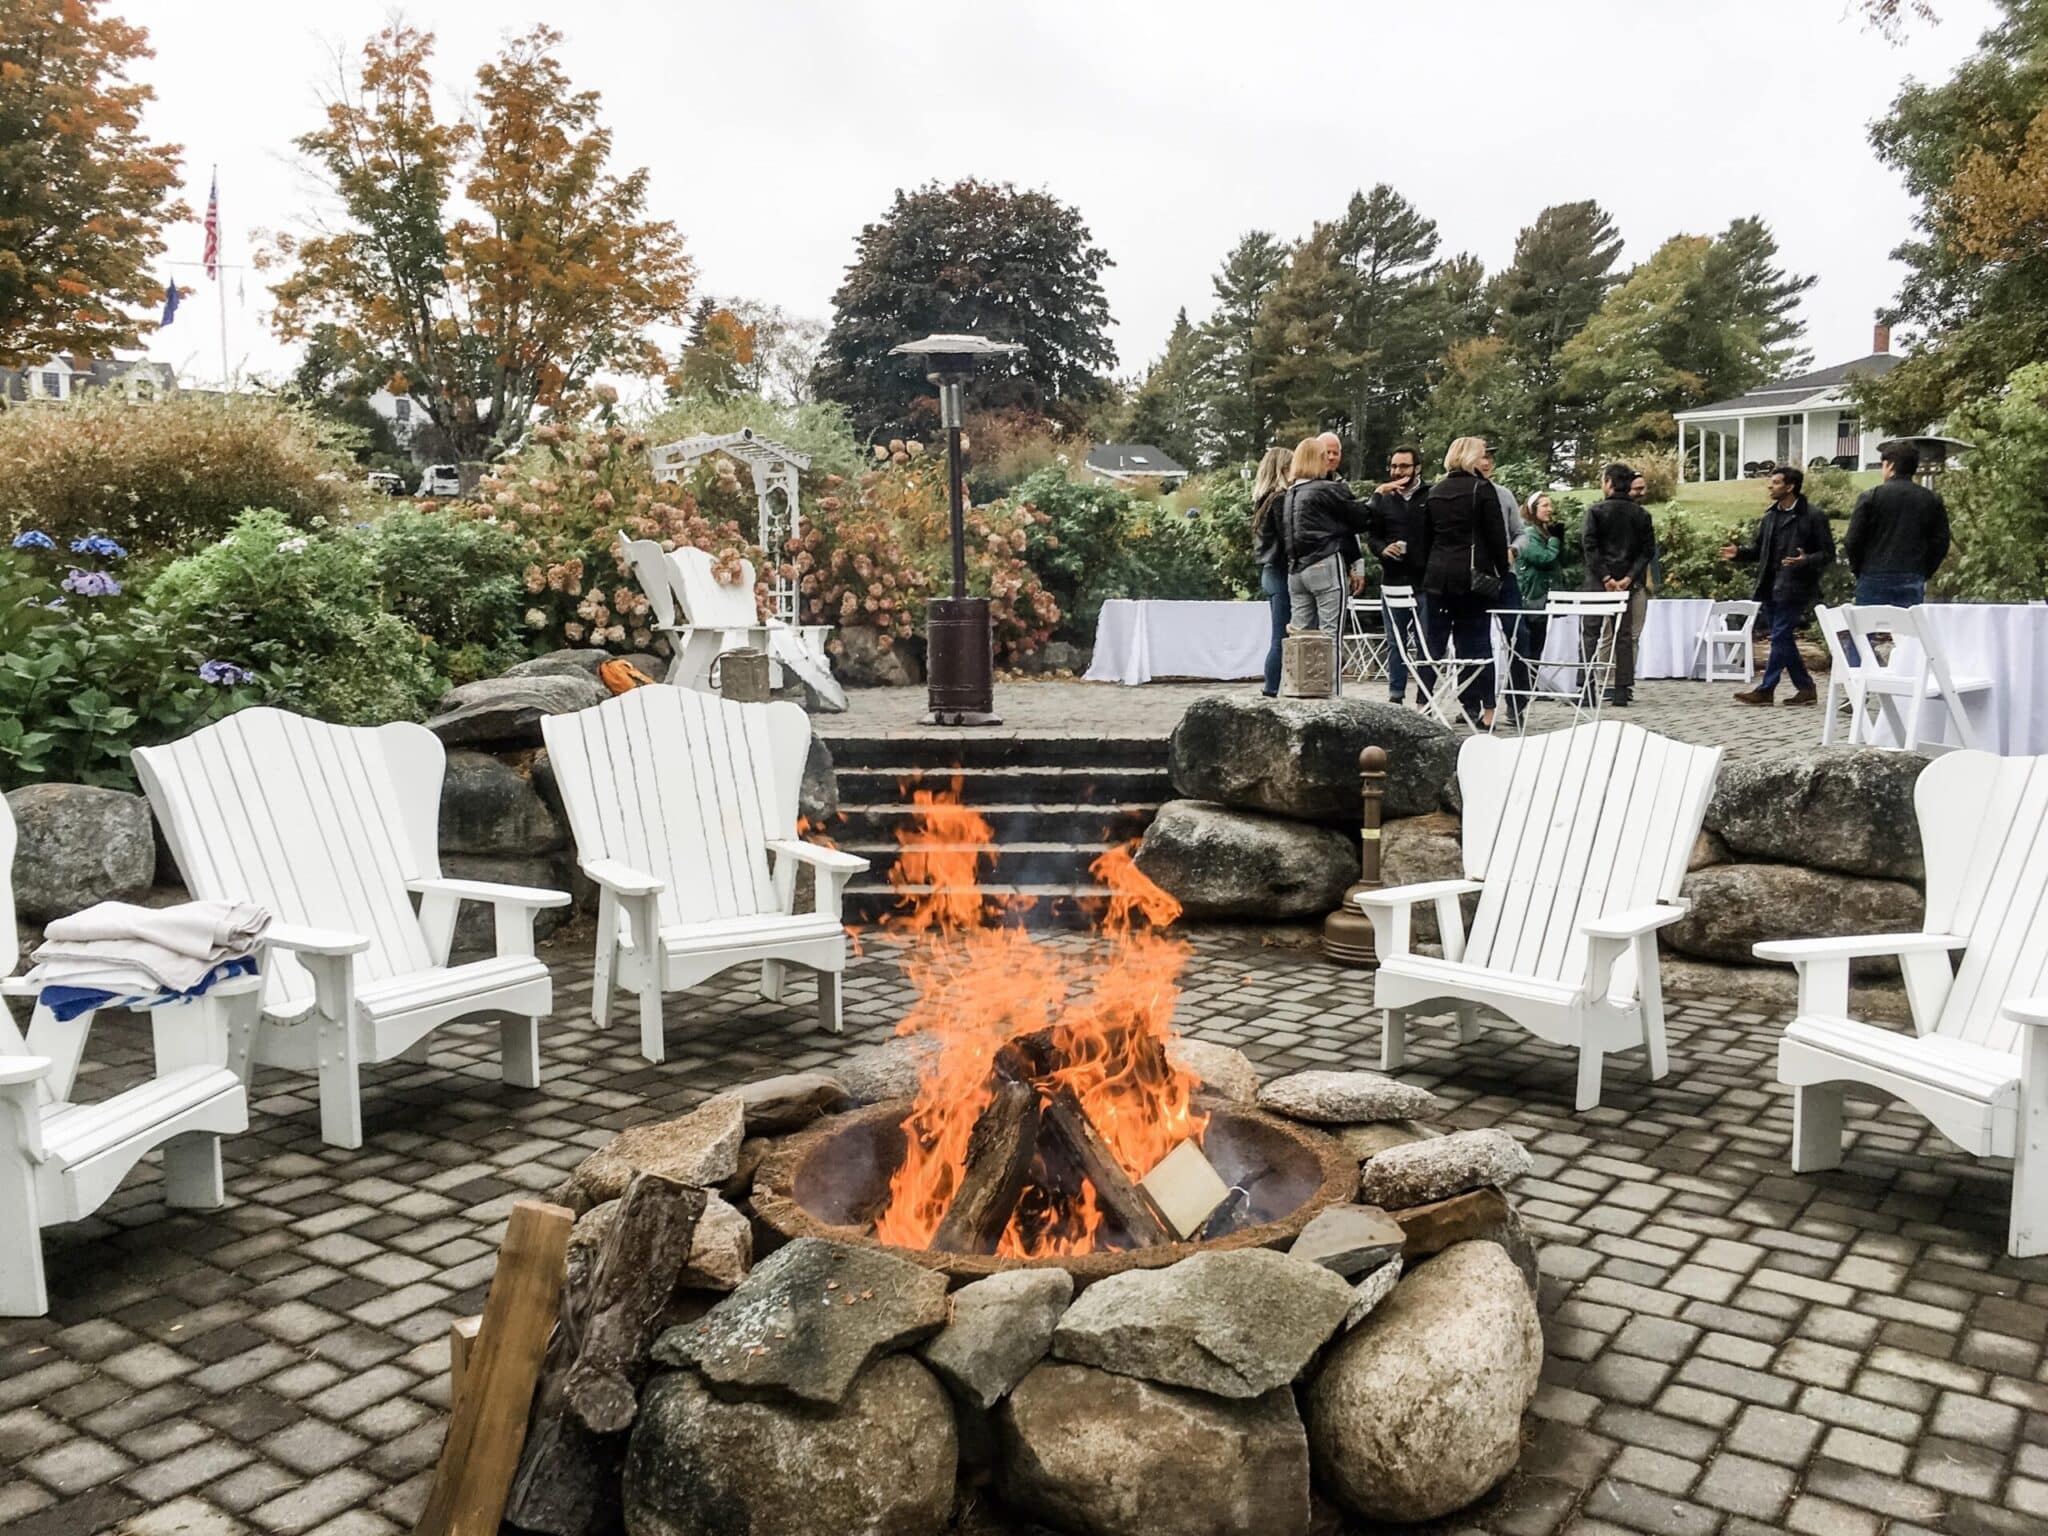 About the Fire Pits at French’s Point